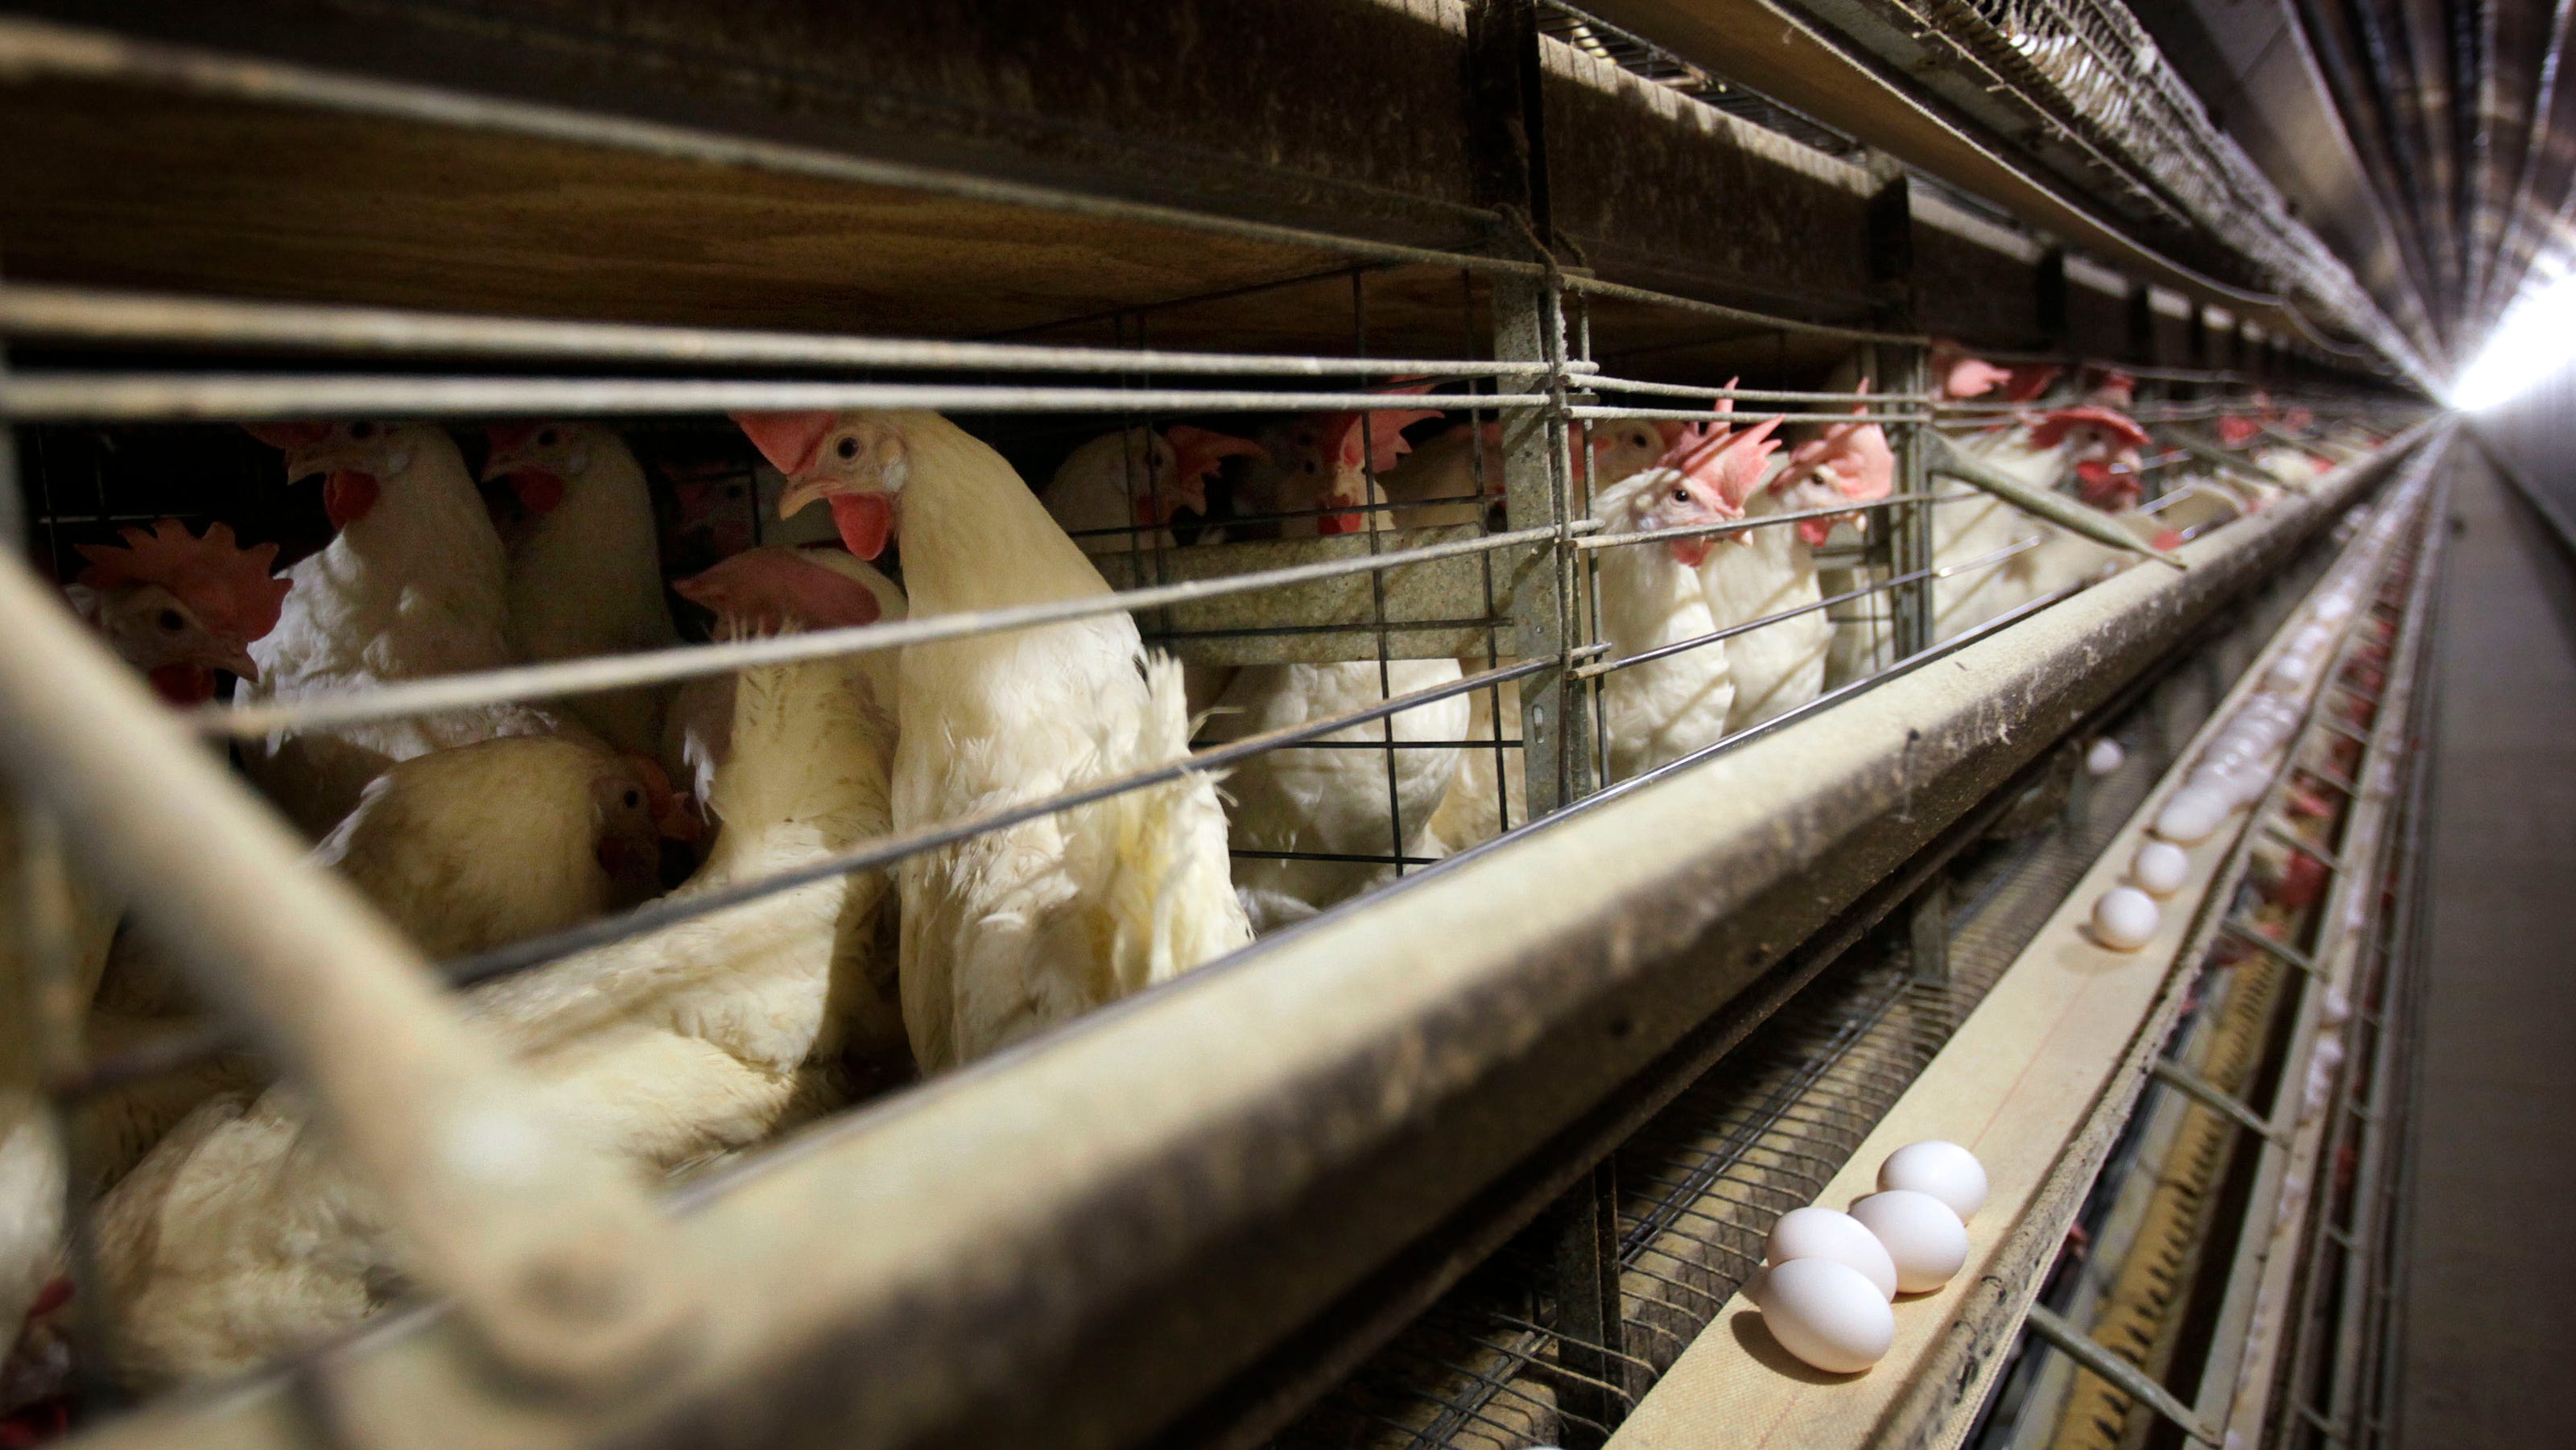 3M hens will be destroyed in Wisconsin egg laying flock due to bird flu